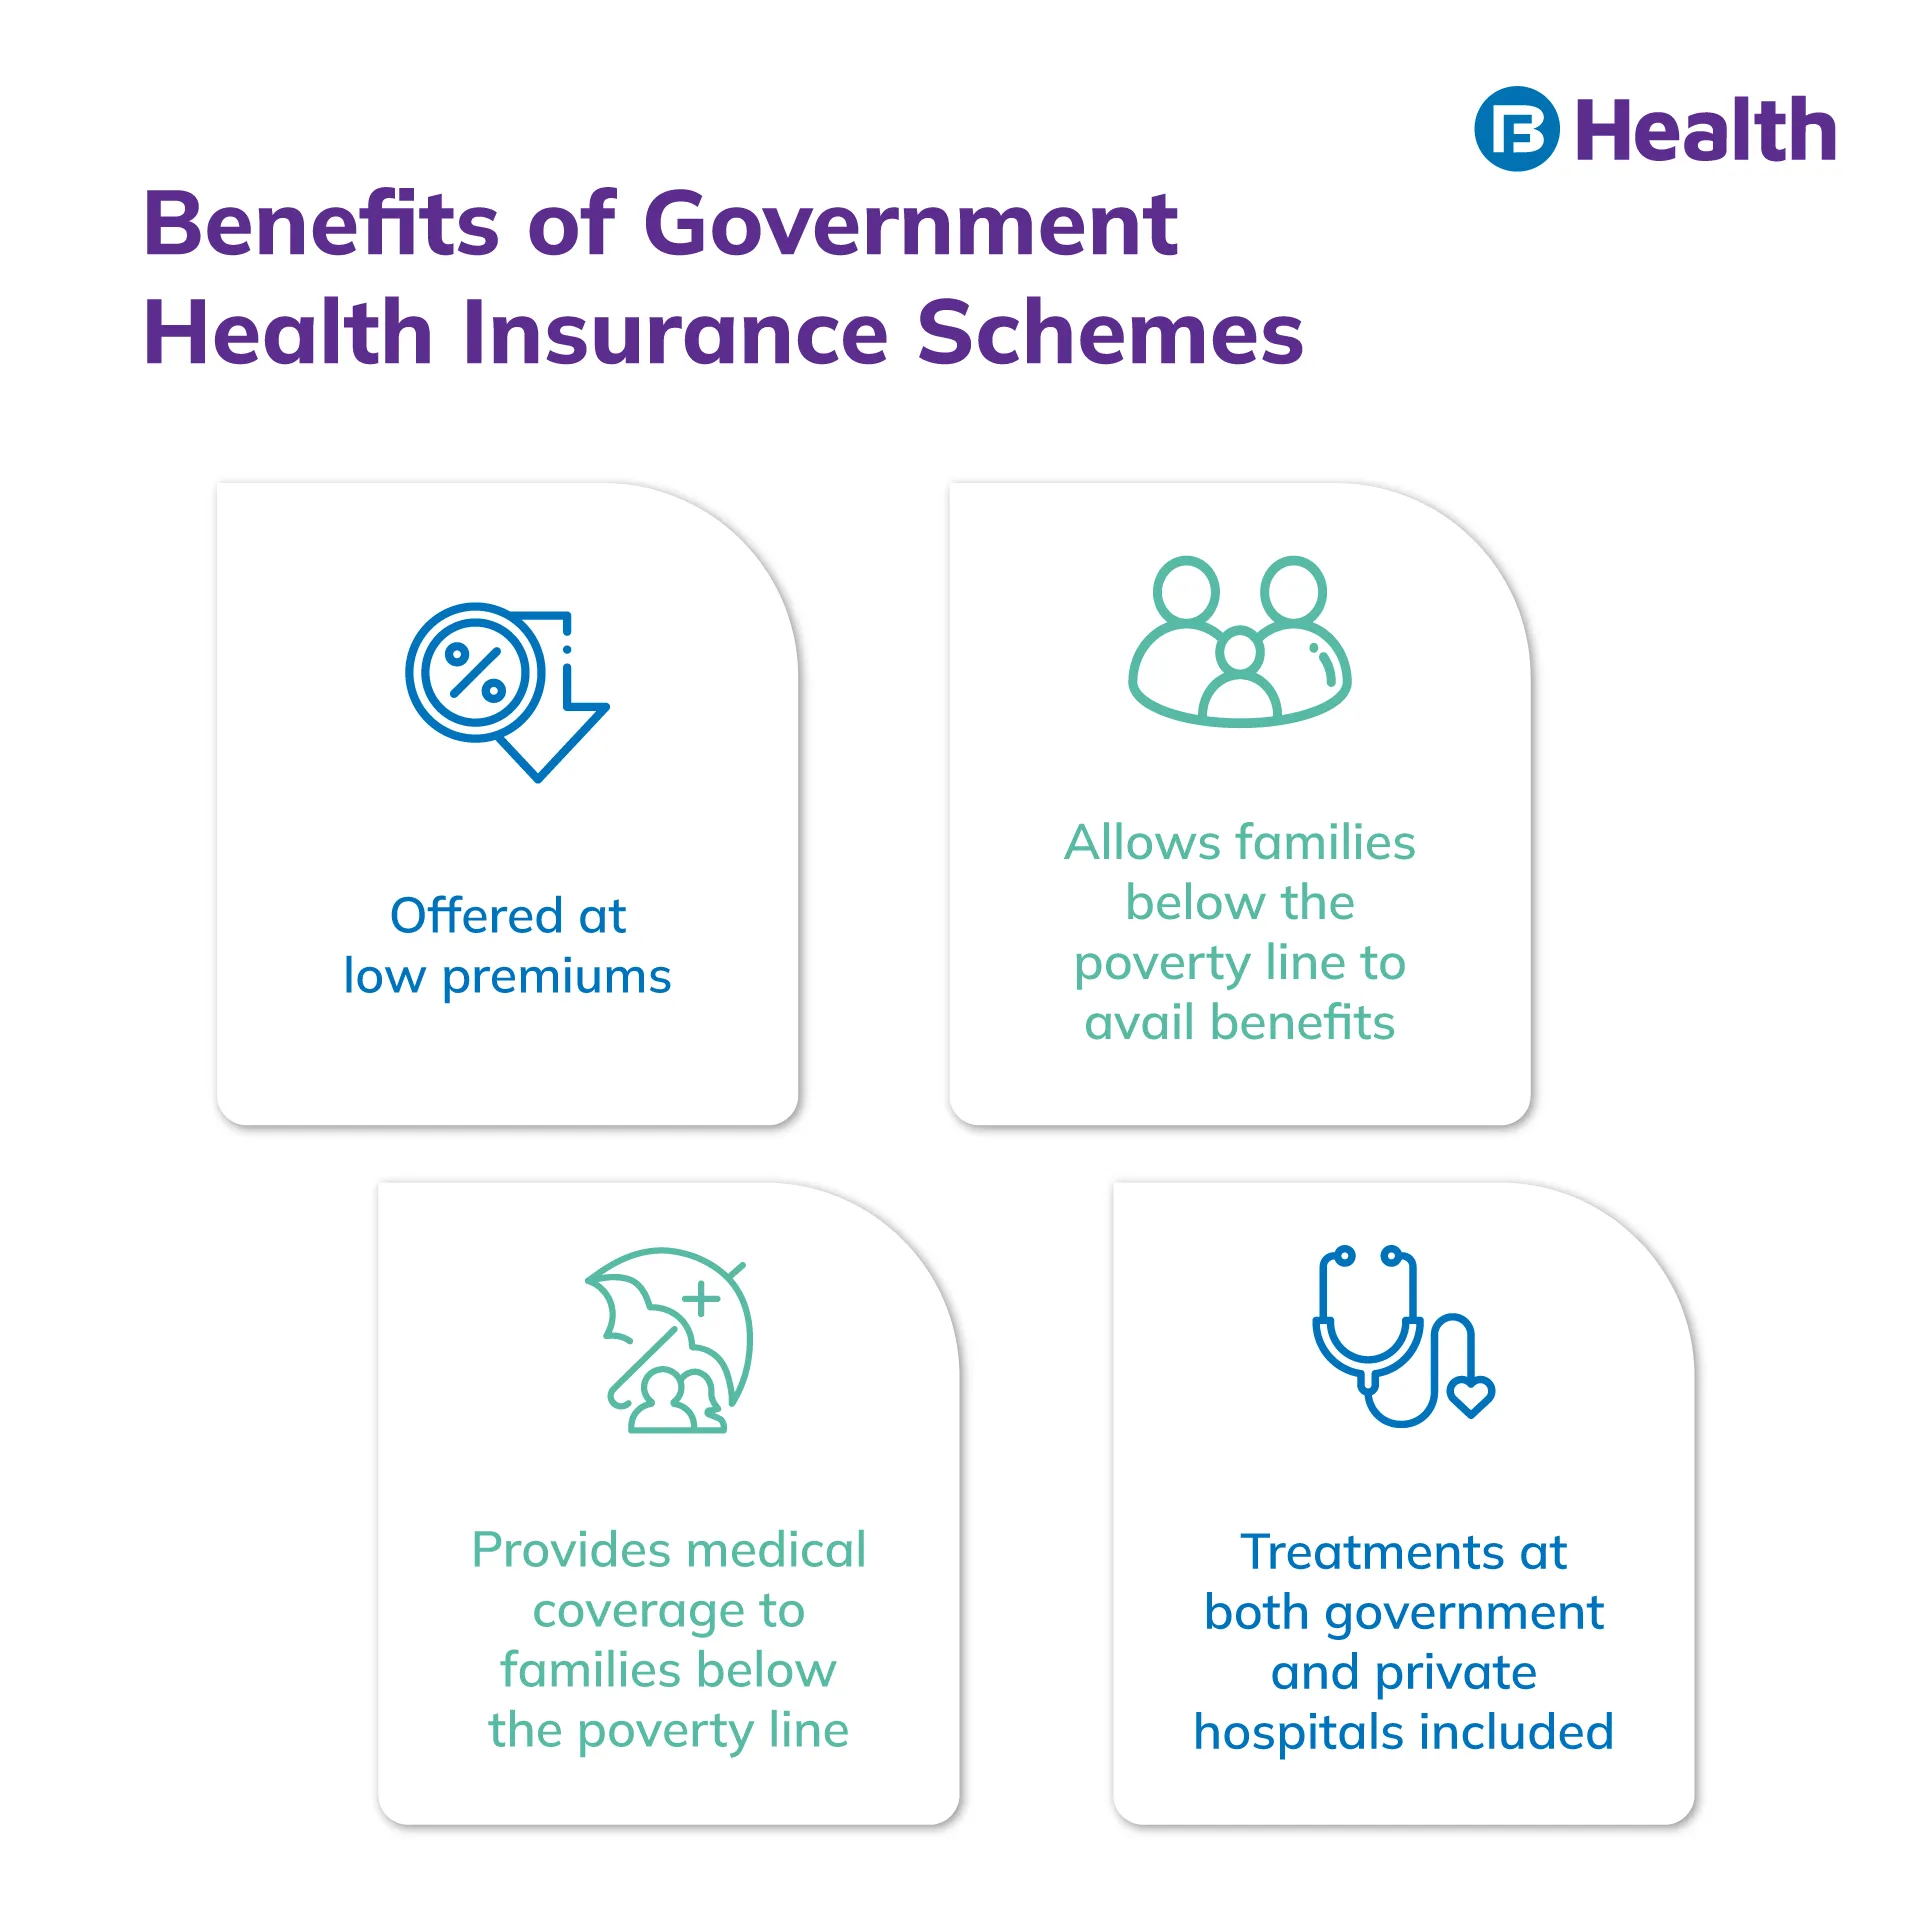 benefits of government Health Insurance Schemes